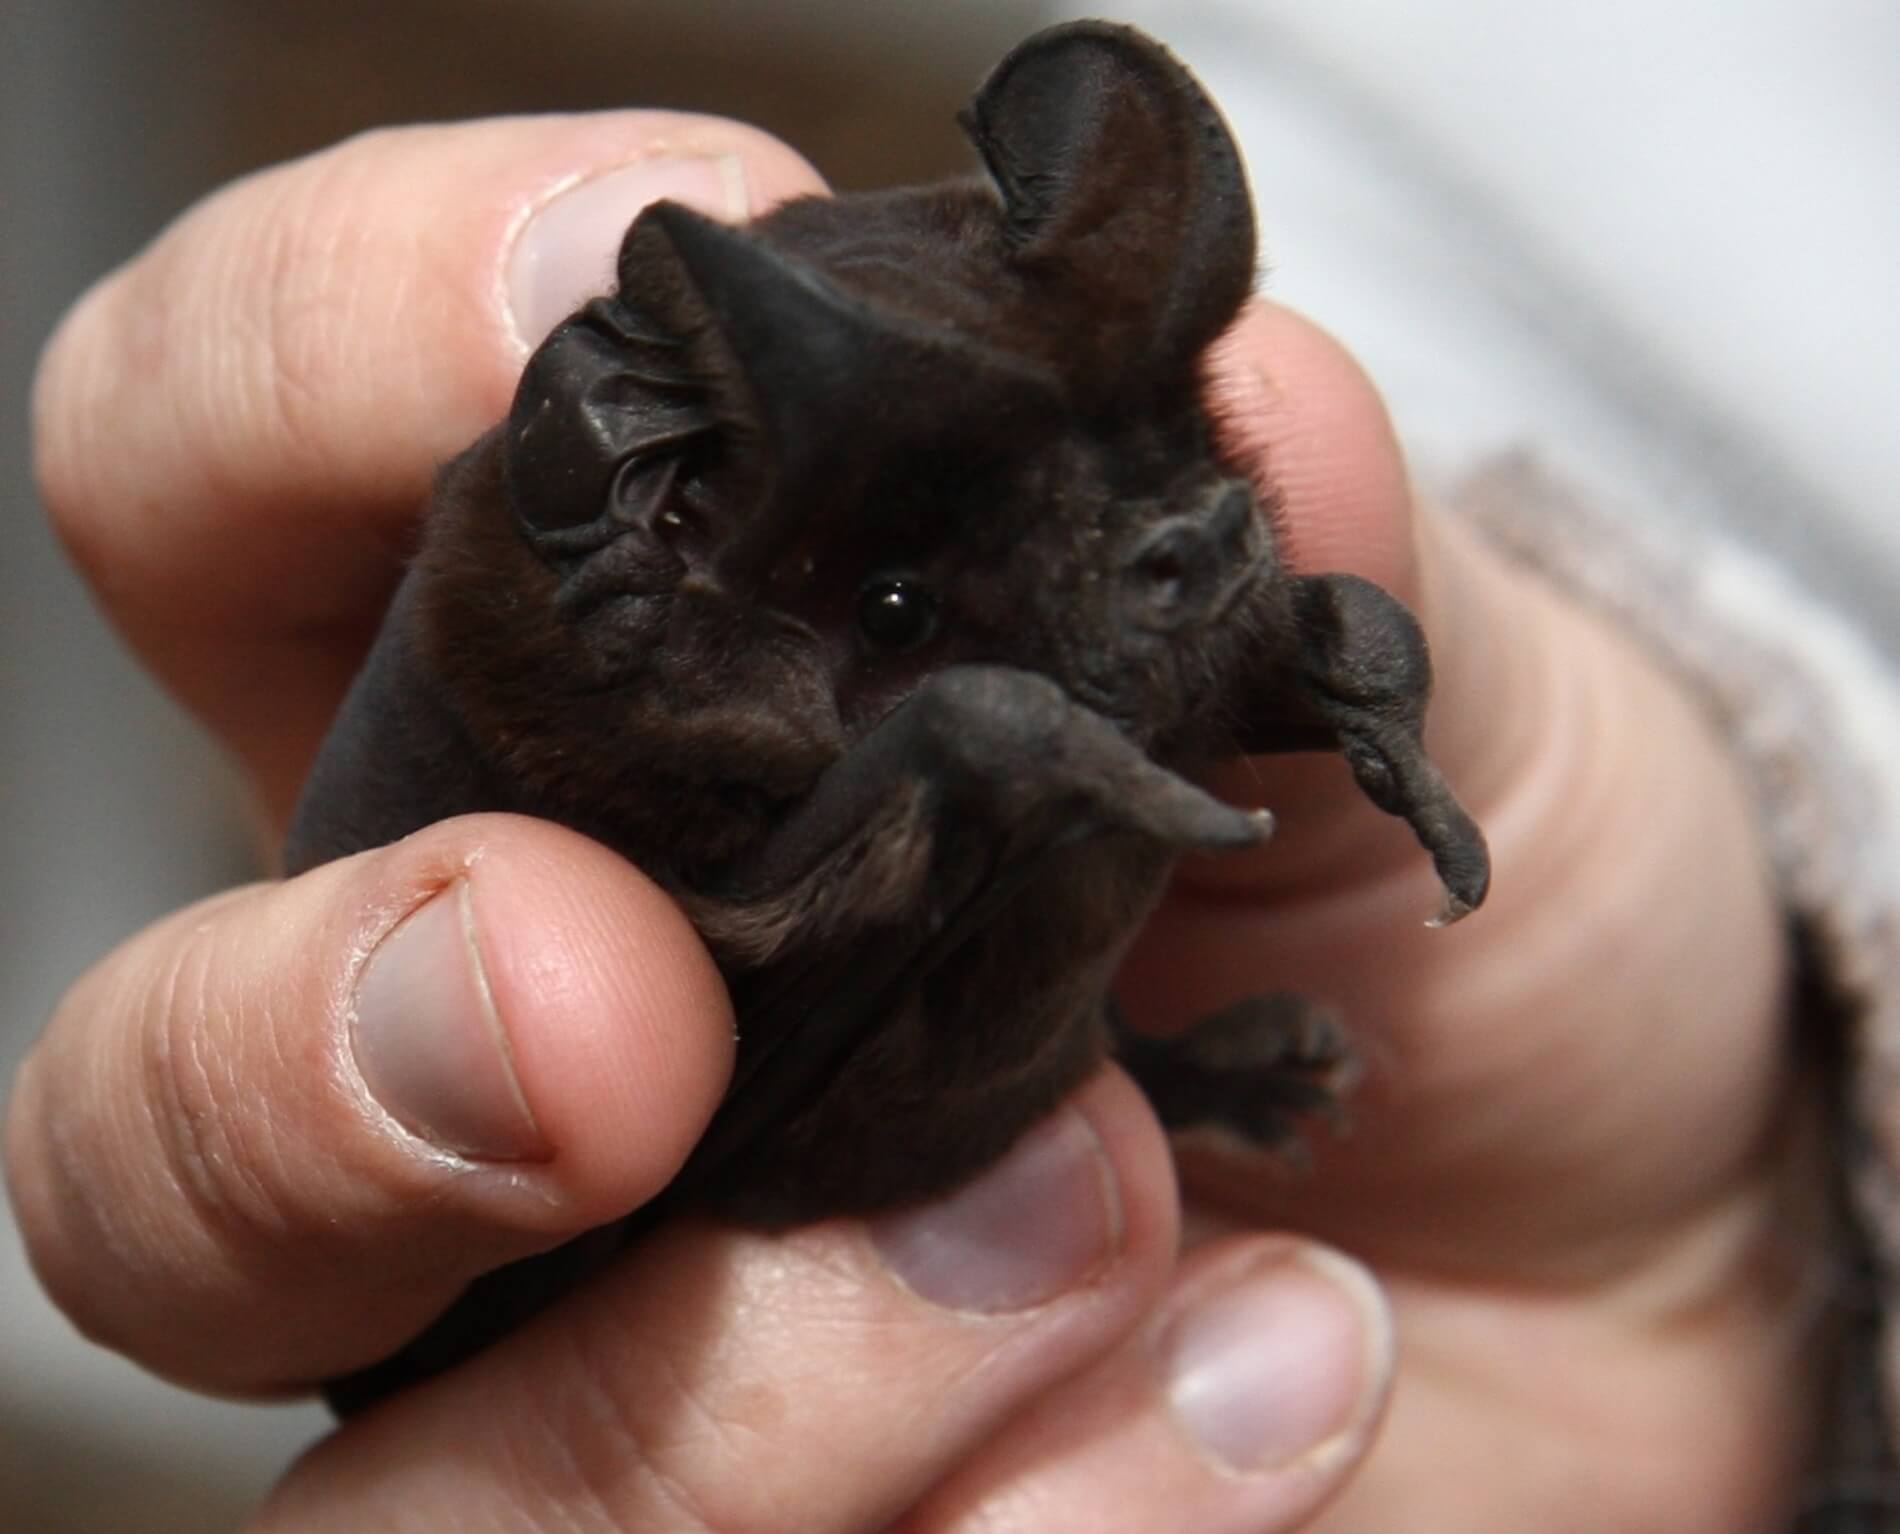 A White Striped Mastif Bat being held in a hand